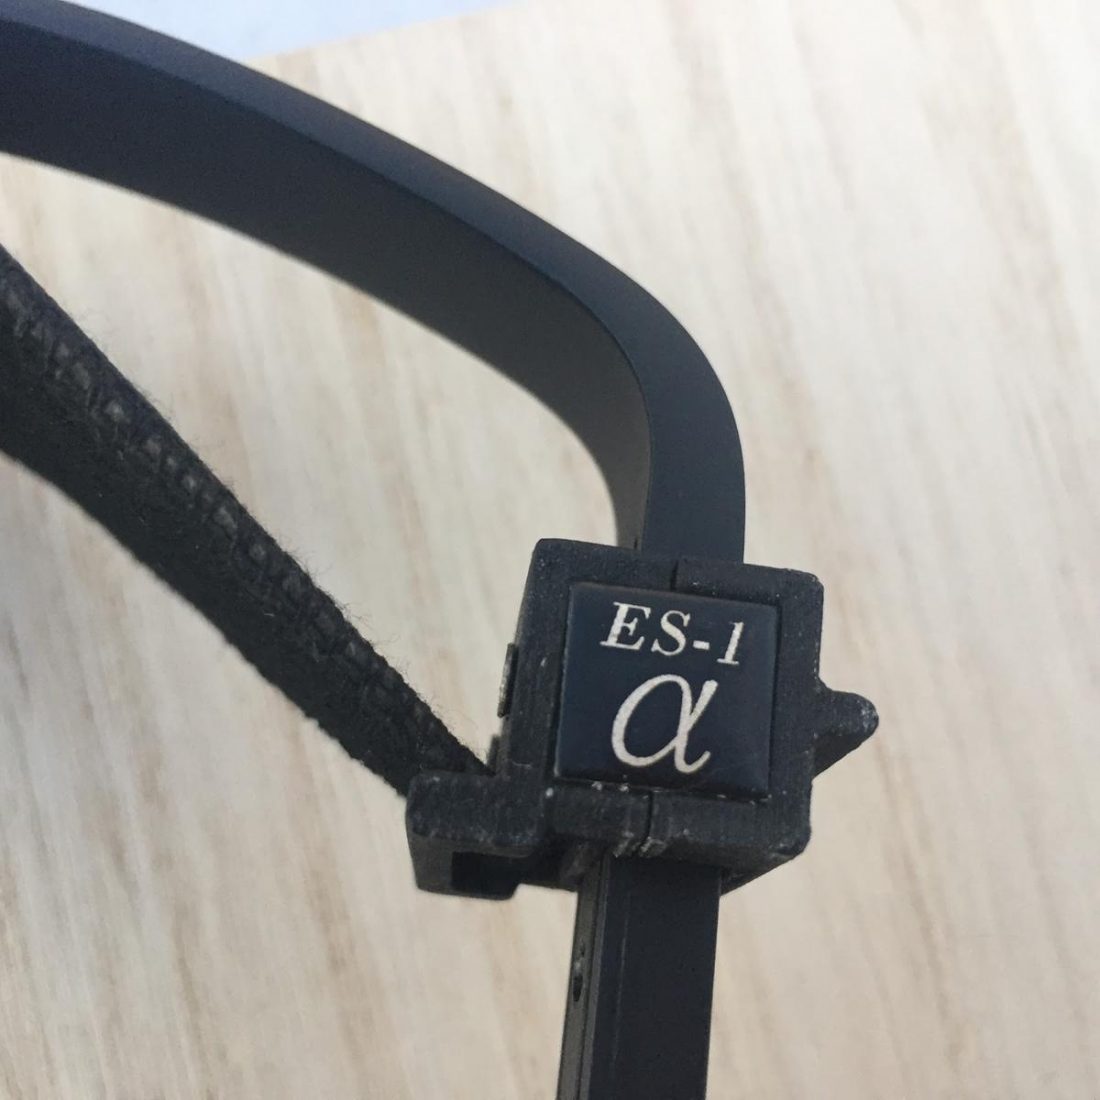 The headband sliders imitate those of the original SR-Omega (and other Stax headphones of the period), but it is the one area where it seems like corners have been cut - they're not particularly well-machined.